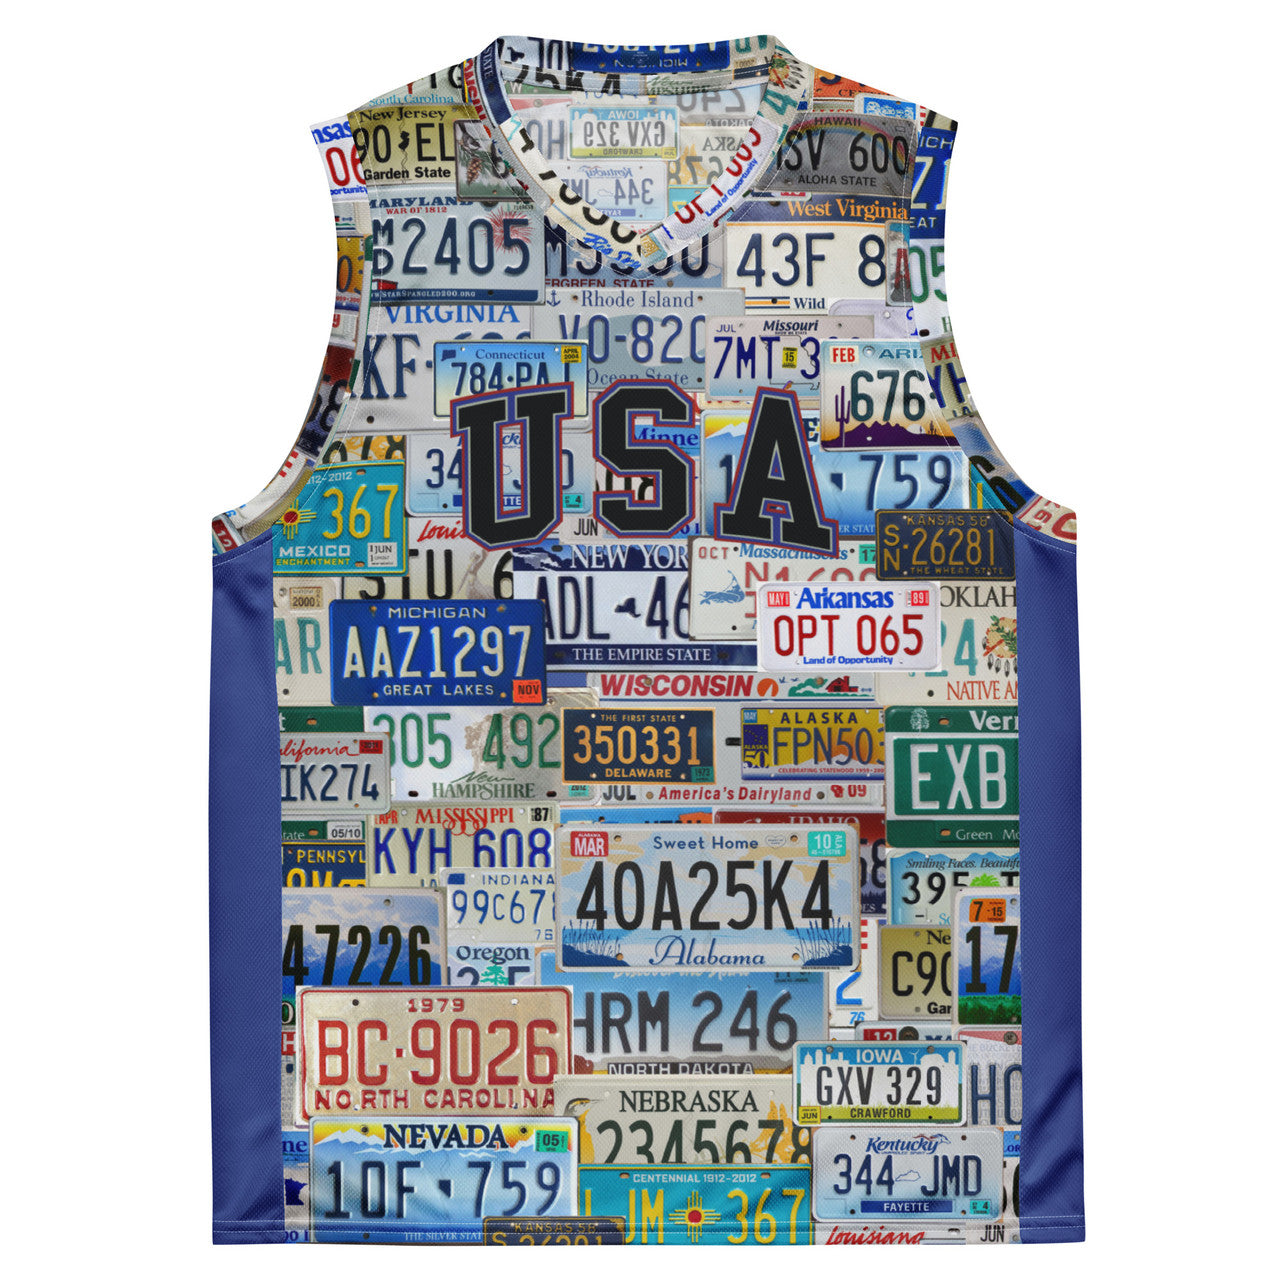 USA License Plates KiSS Recycled unisex basketball jersey - Travel NYC LA Texas Chicago